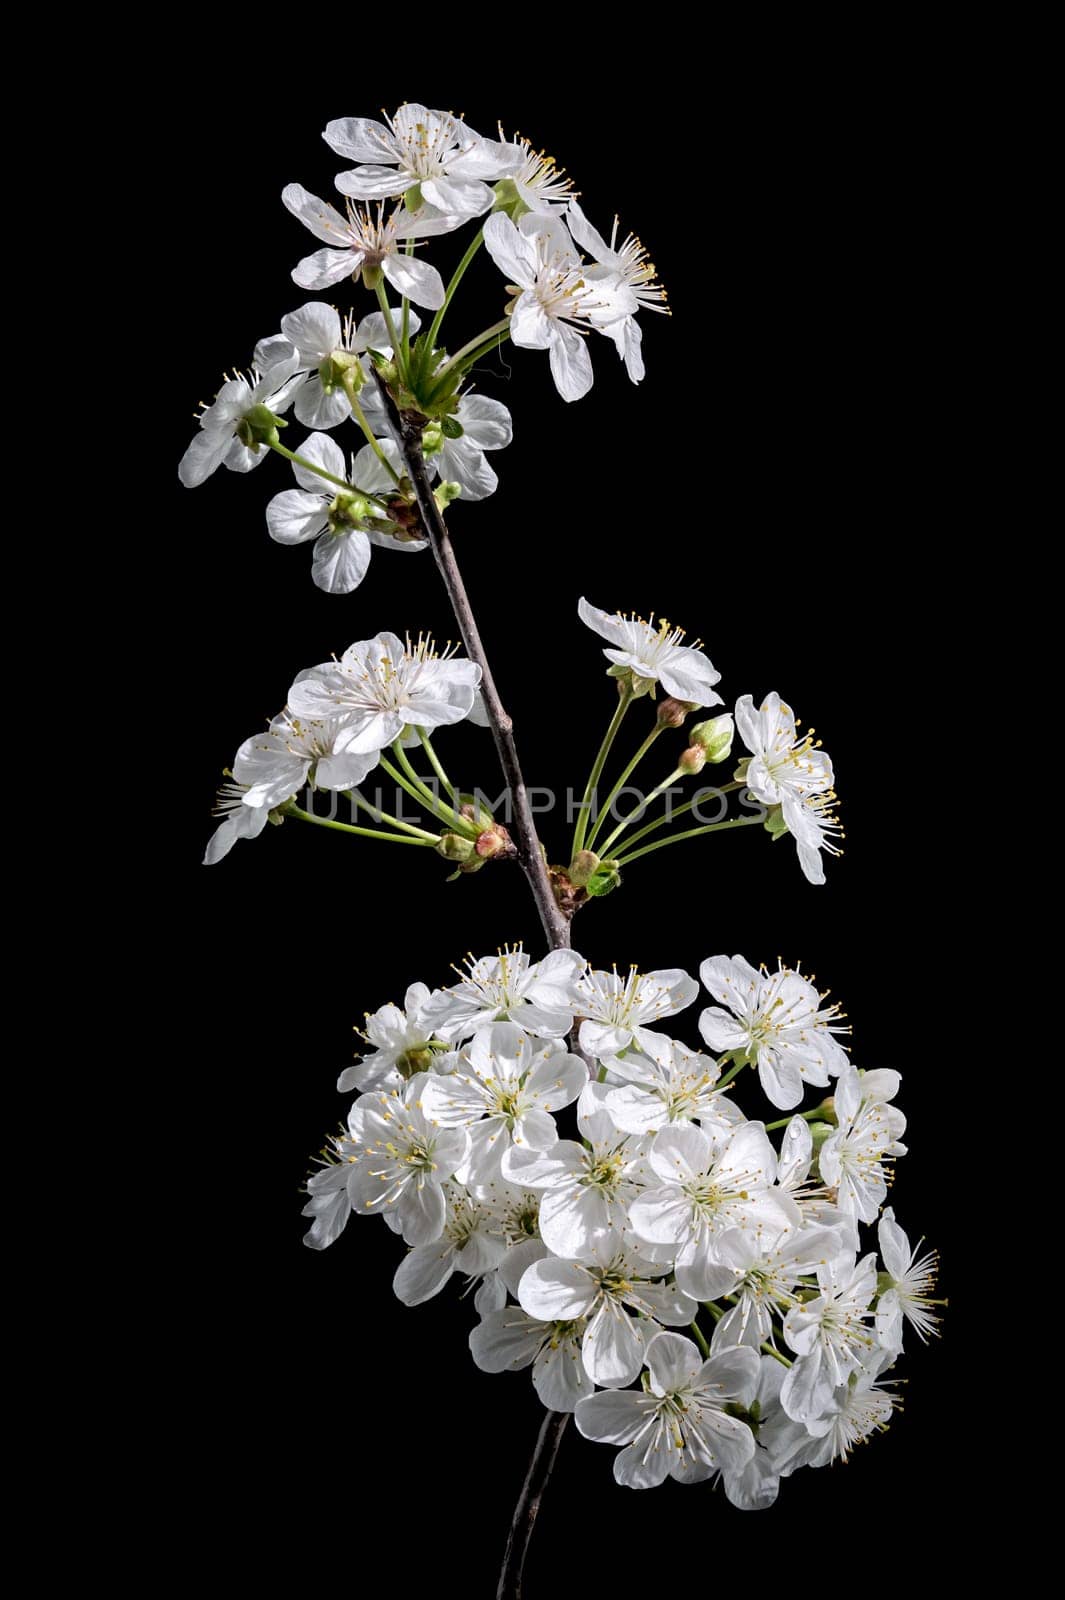 Beautiful white cherry blossoms isolated on a black background. Flower head close-up.